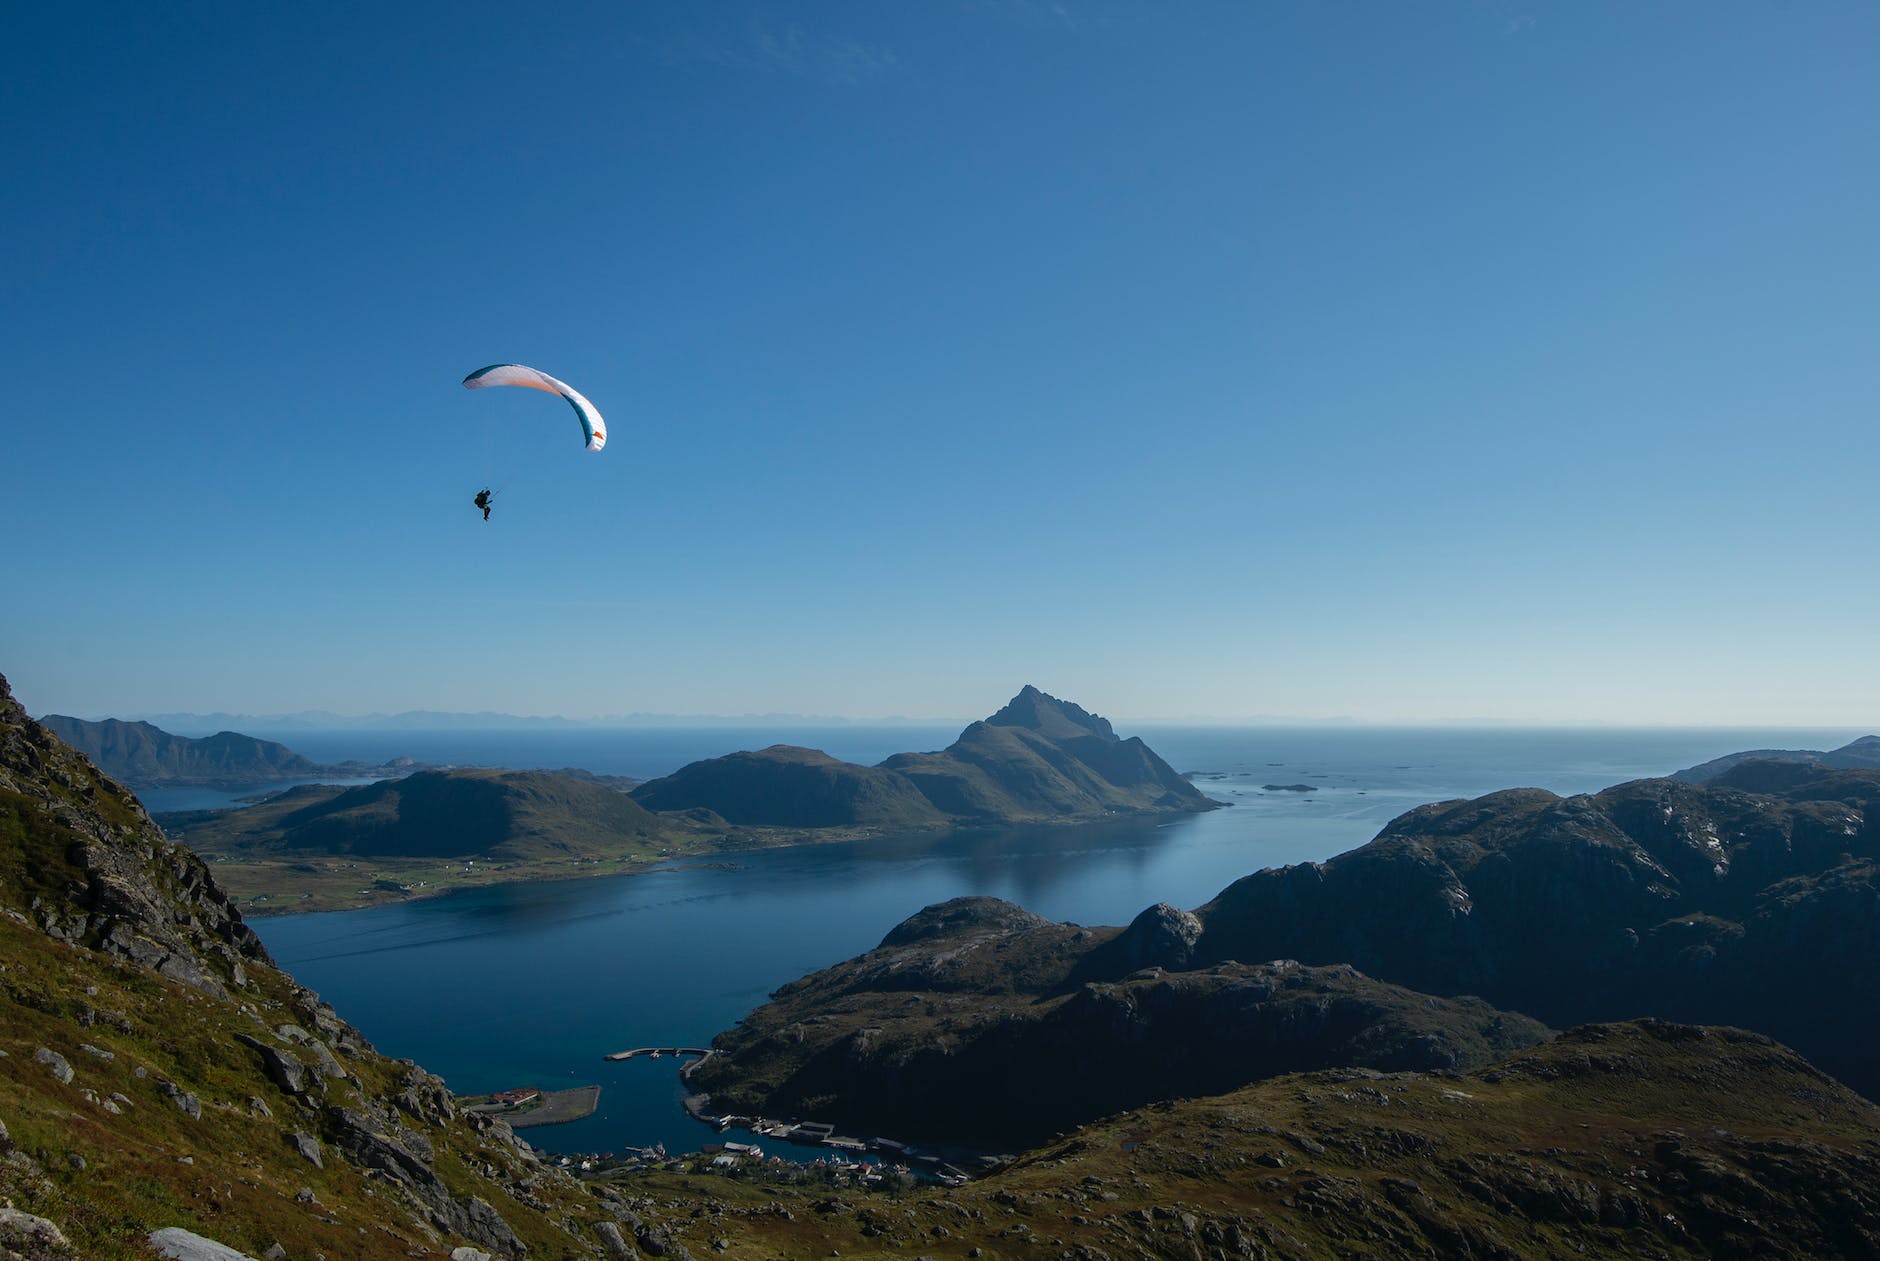 unrecognizable tourist on paraglider flying above ocean and mountains